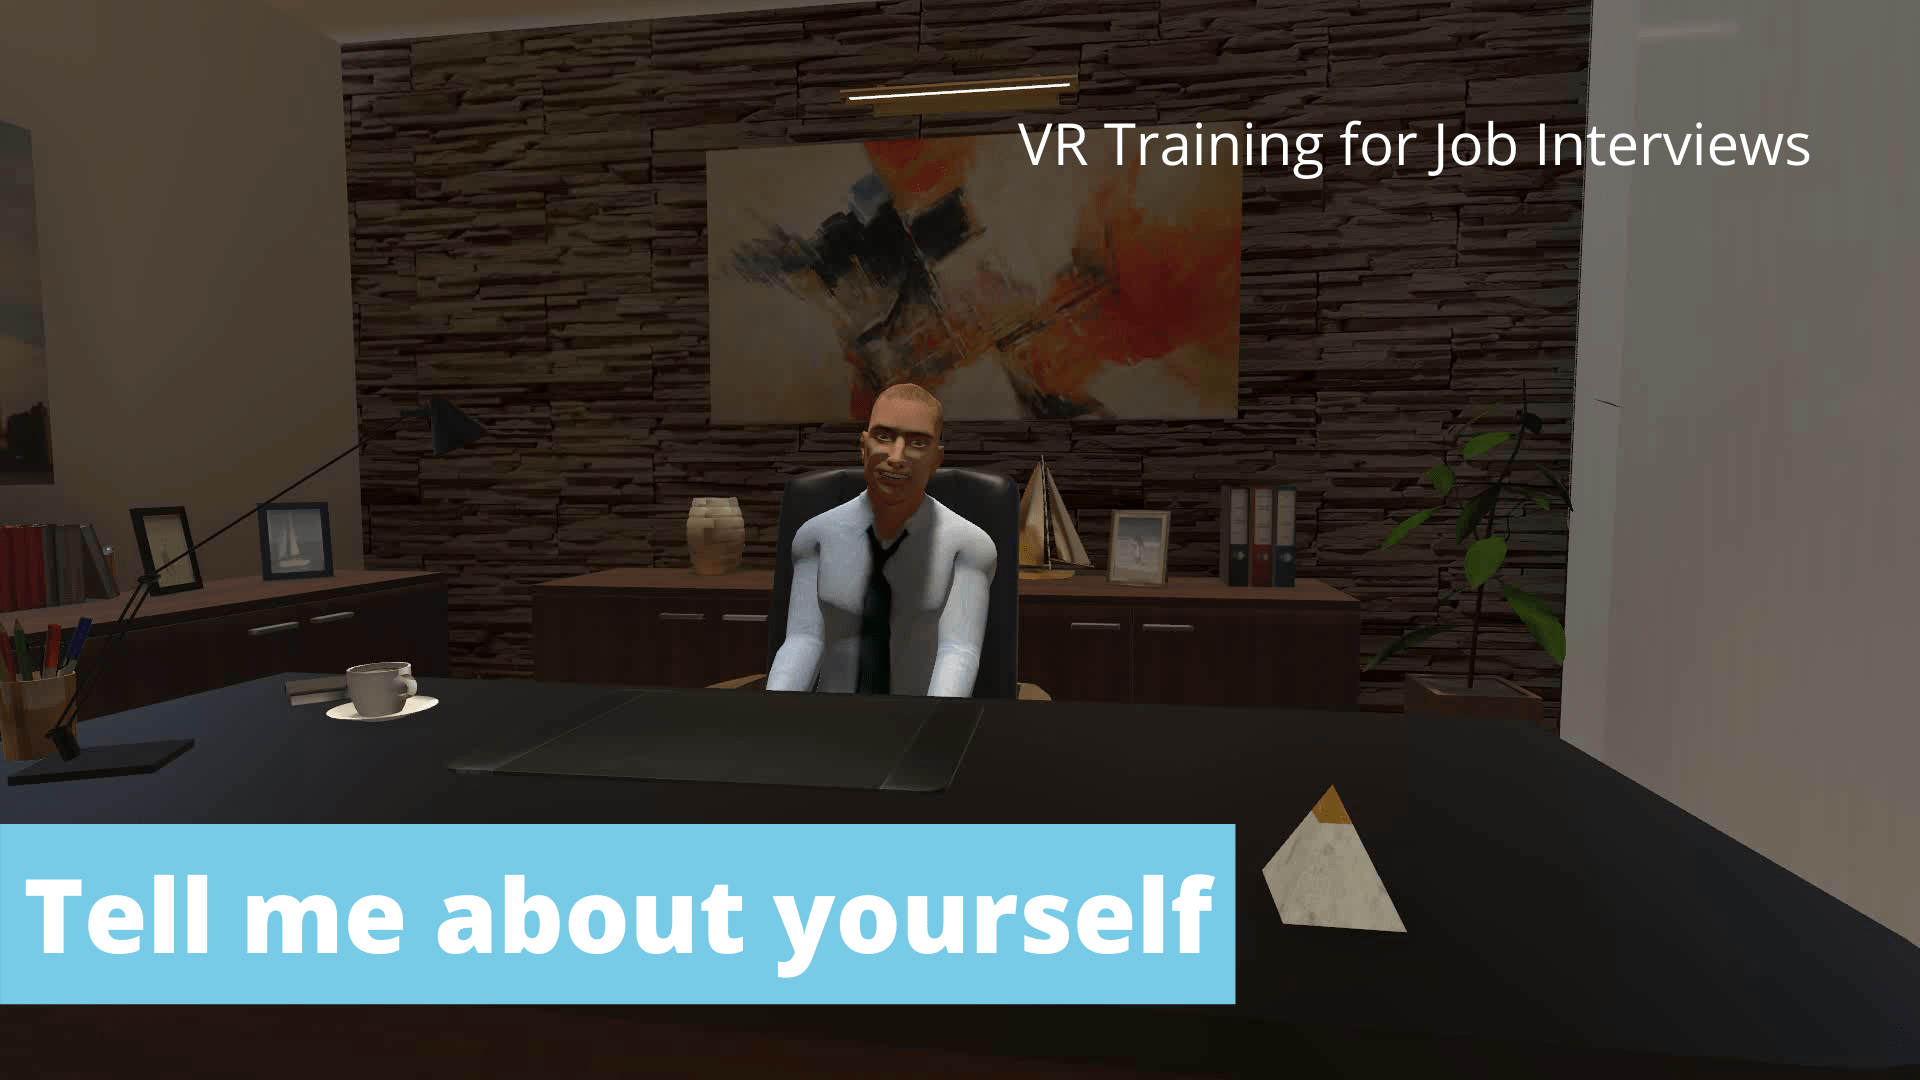 Training Job Seekers for interviews with VR